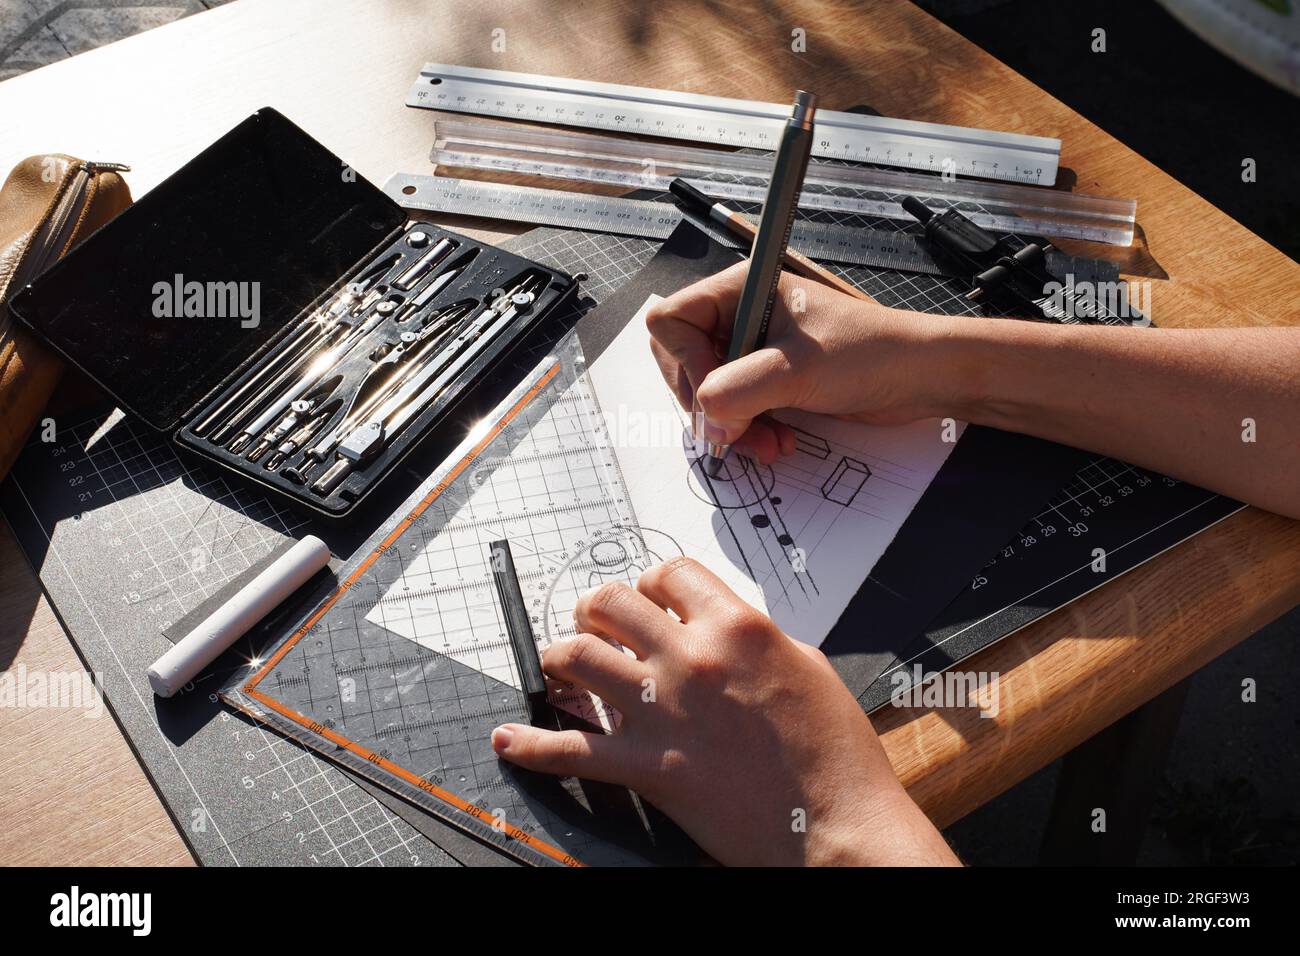 Architect and designer working accurately on a project drawing sketches and technical drafts on paper using professional tools like rulers compass and Stock Photo